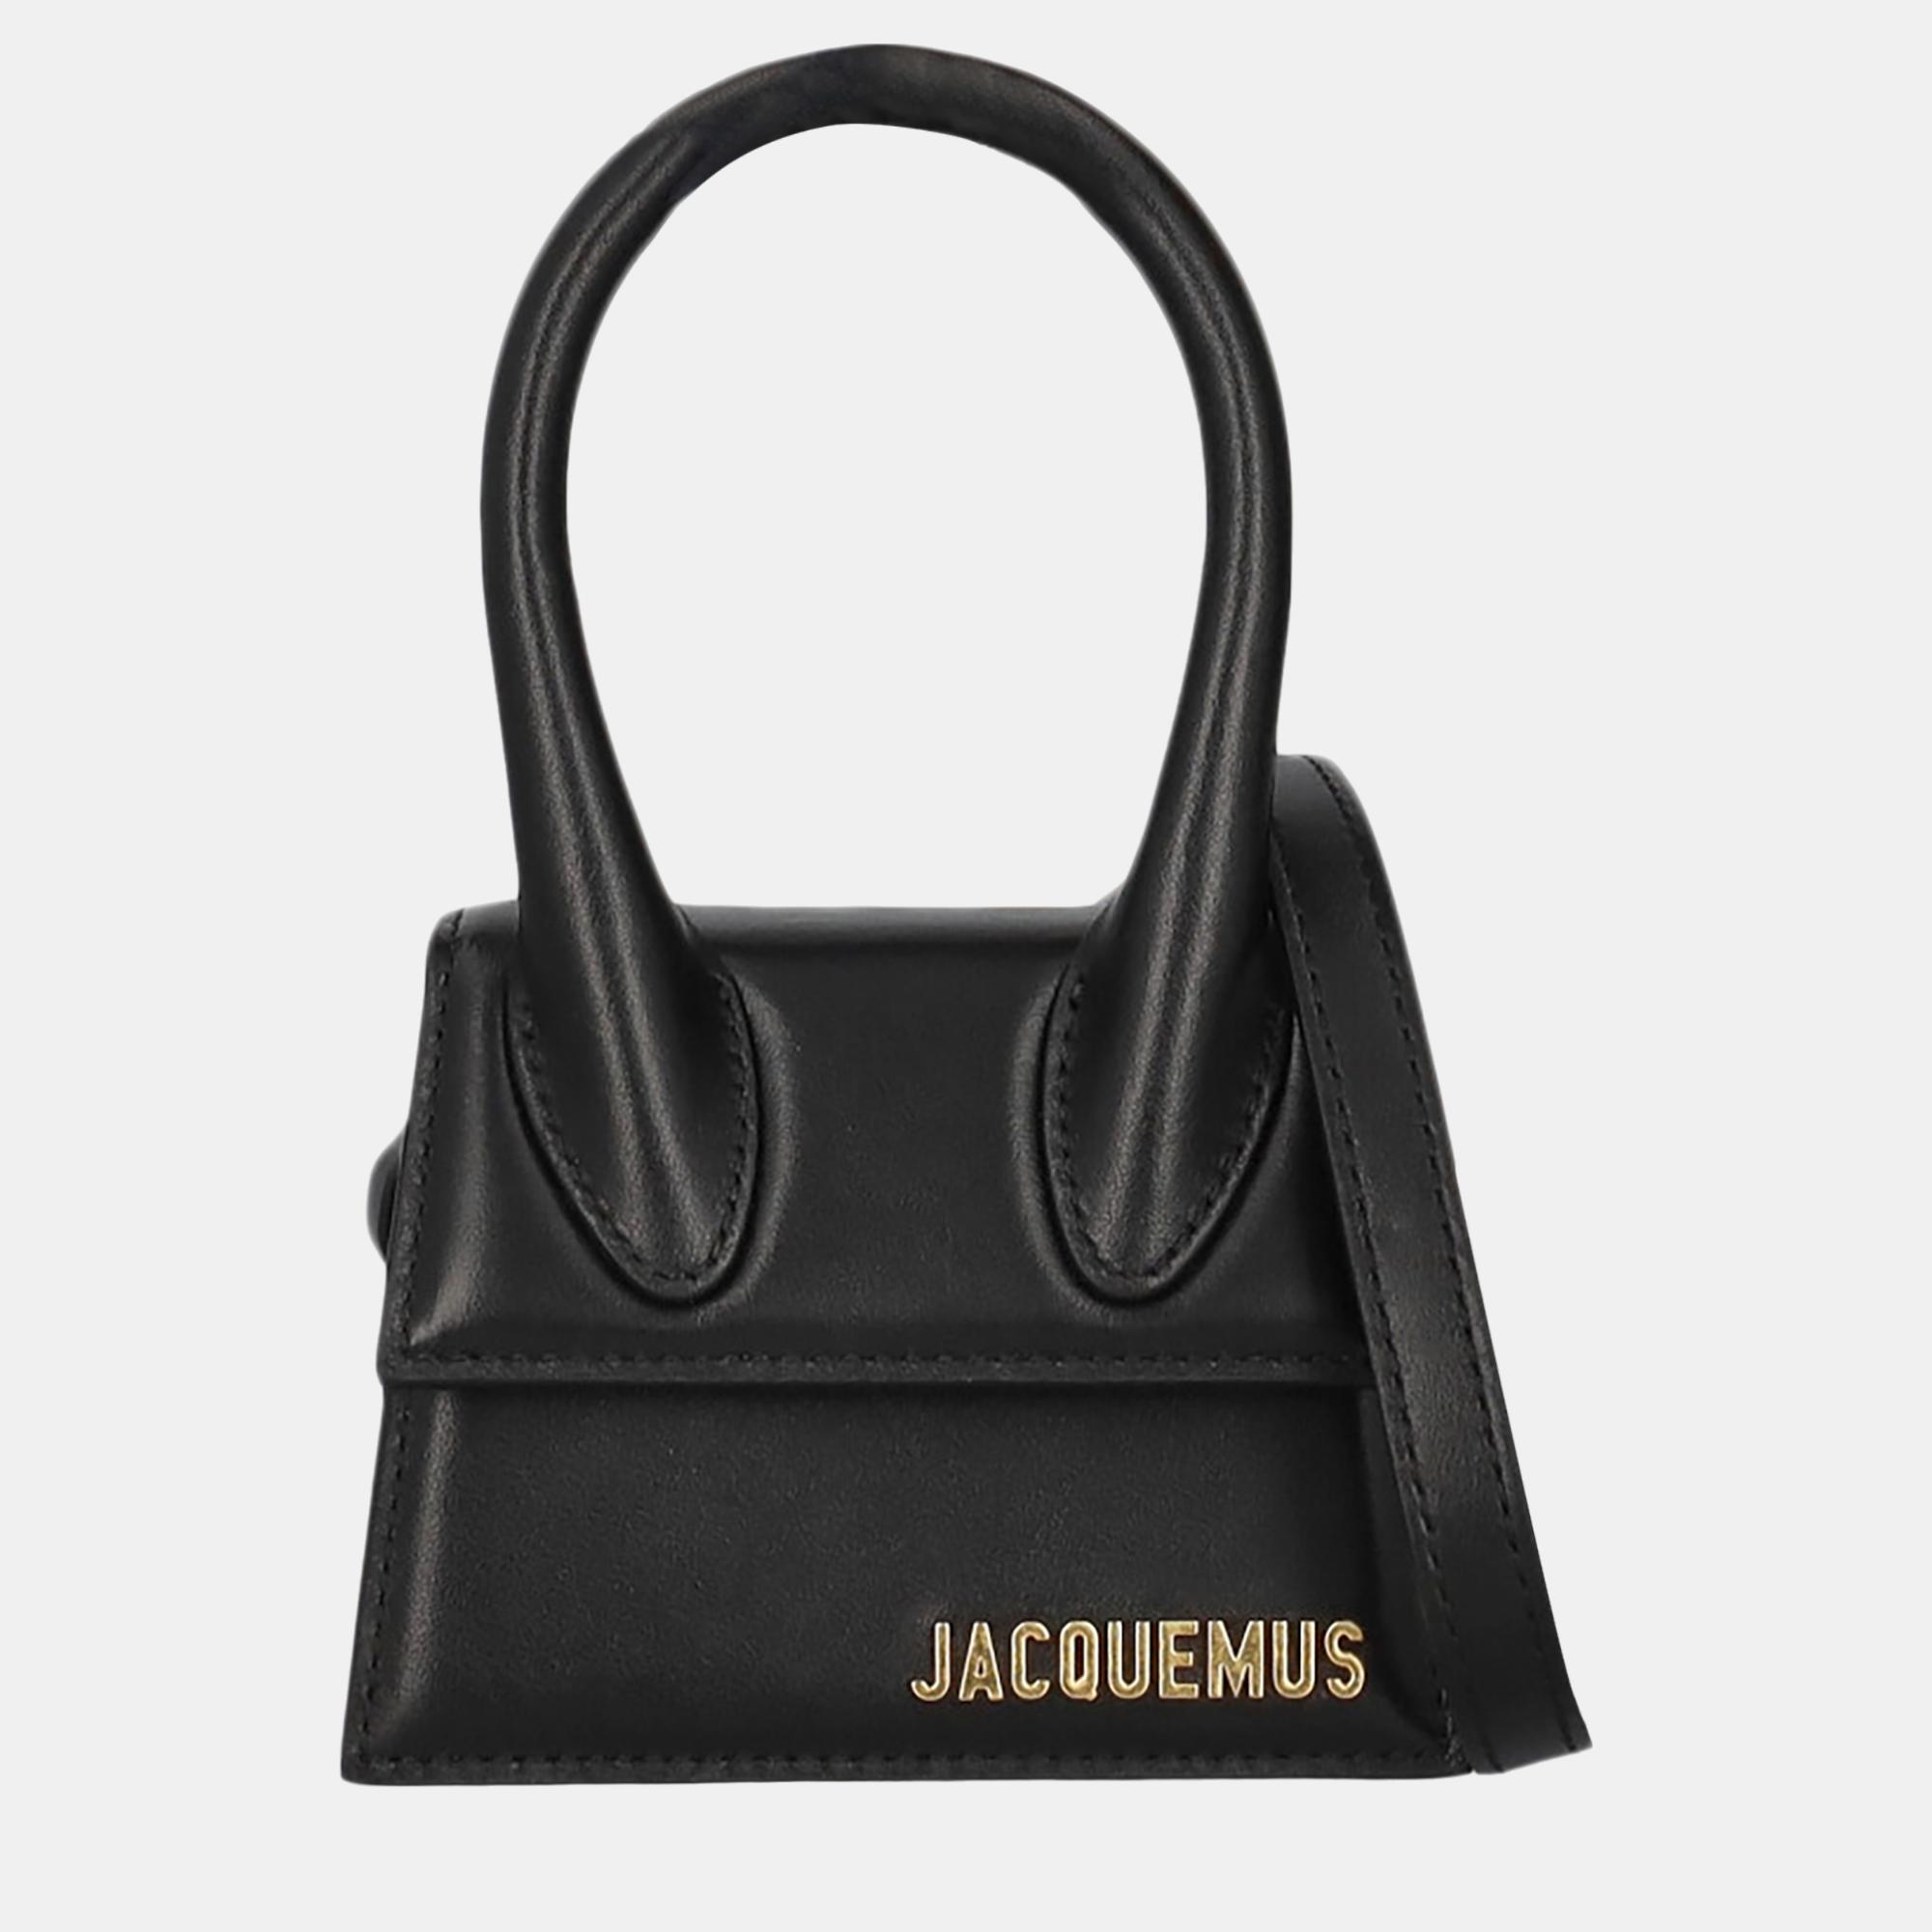 Jacquemus Women's Leather Cross Body Bag - Black - One Size